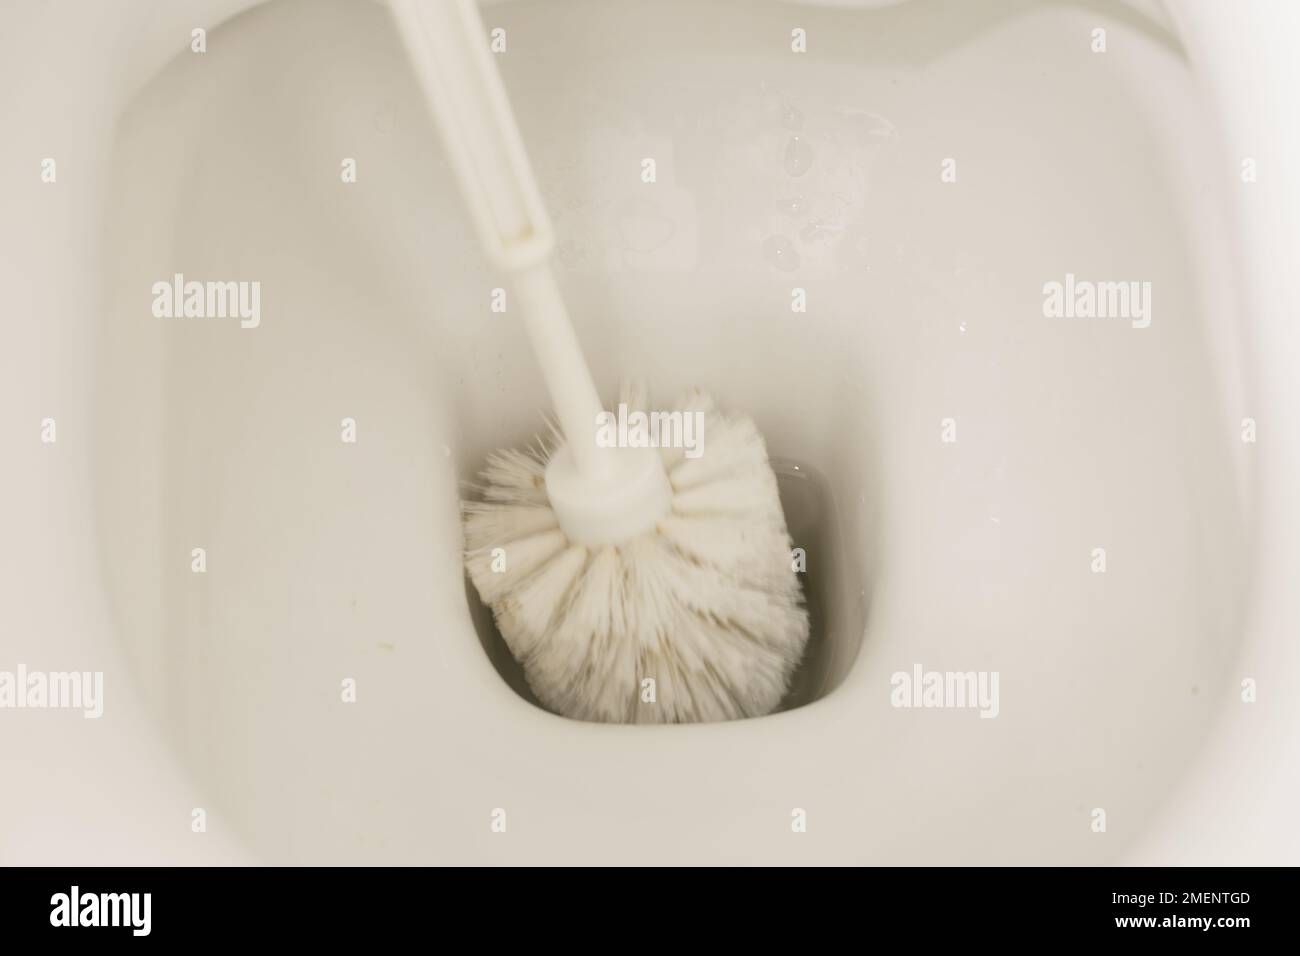 meticulously-cleaned white toilet bowl scrubbed by a gloved hand utilizing a small brush Stock Photo